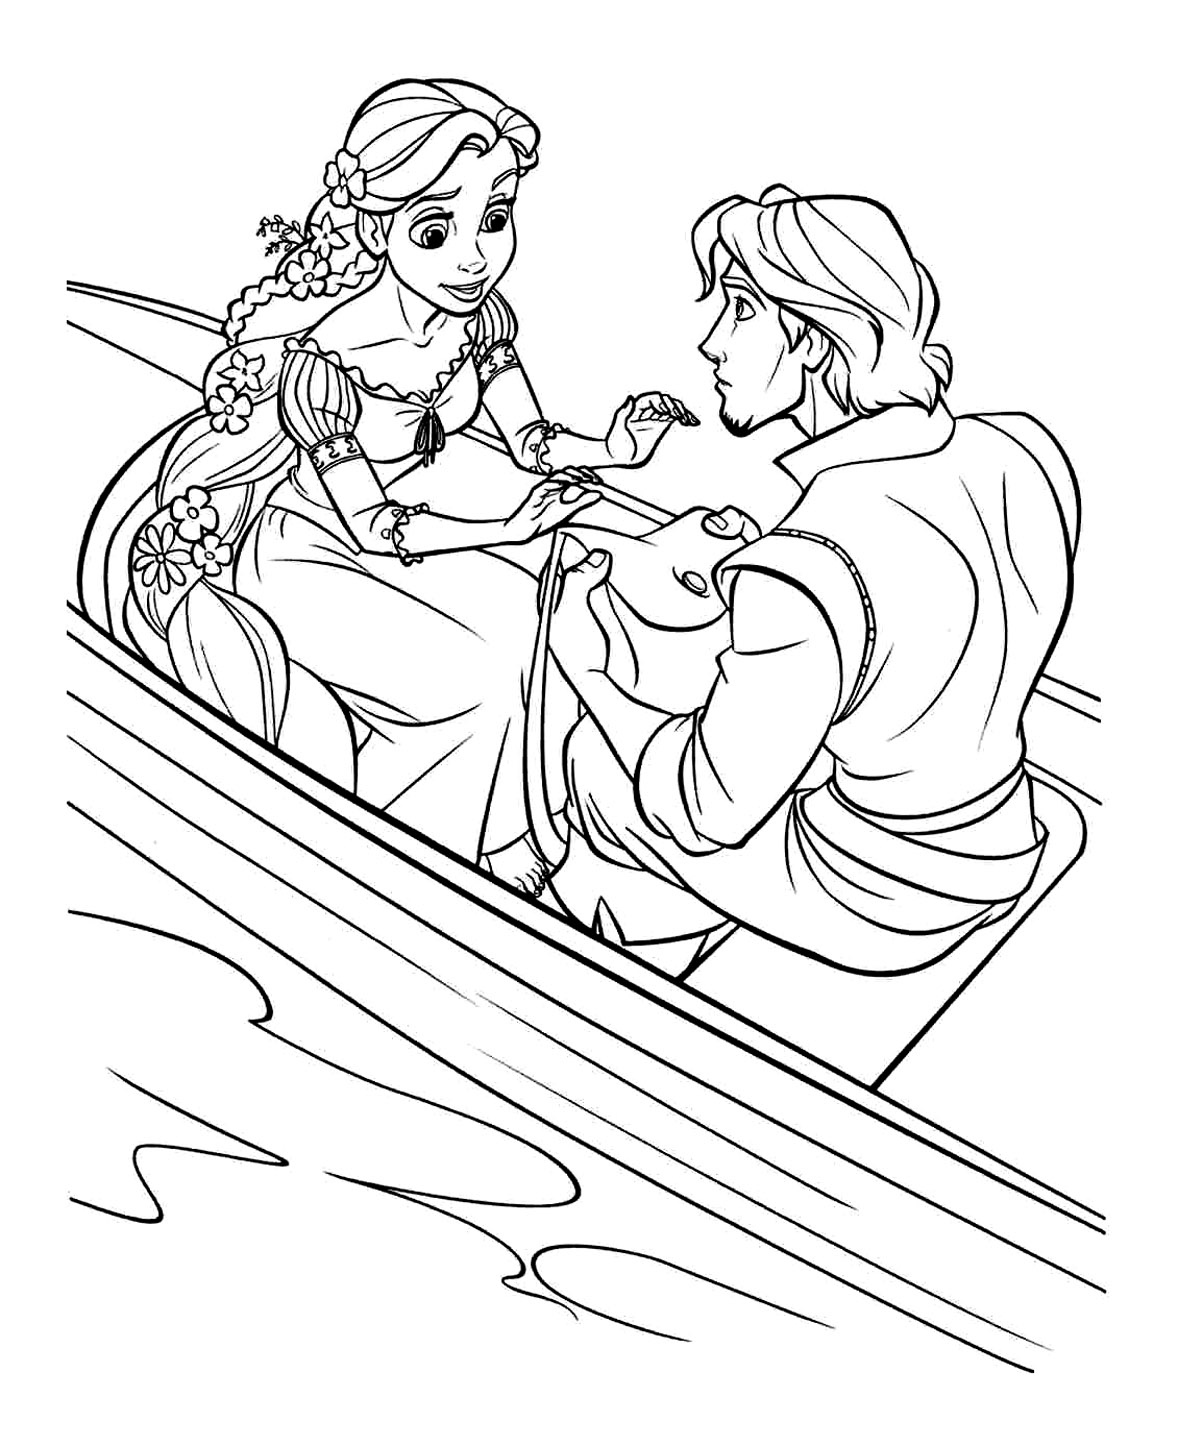 Flynn gives his bag to Rapunzel Coloring Page